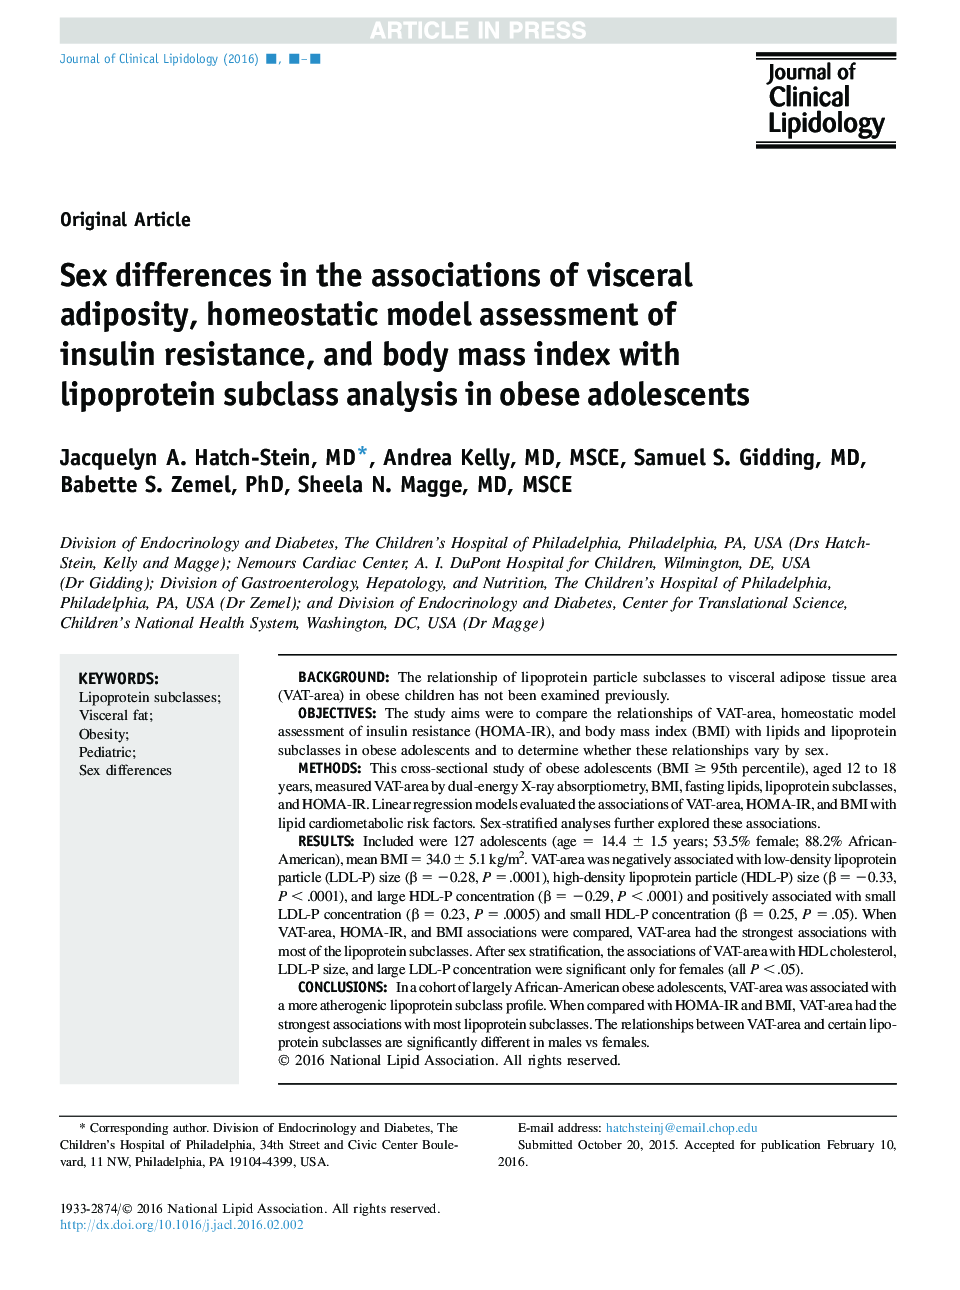 Sex differences in the associations of visceral adiposity, homeostatic model assessment of insulin resistance, and body mass index with lipoprotein subclass analysis in obese adolescents